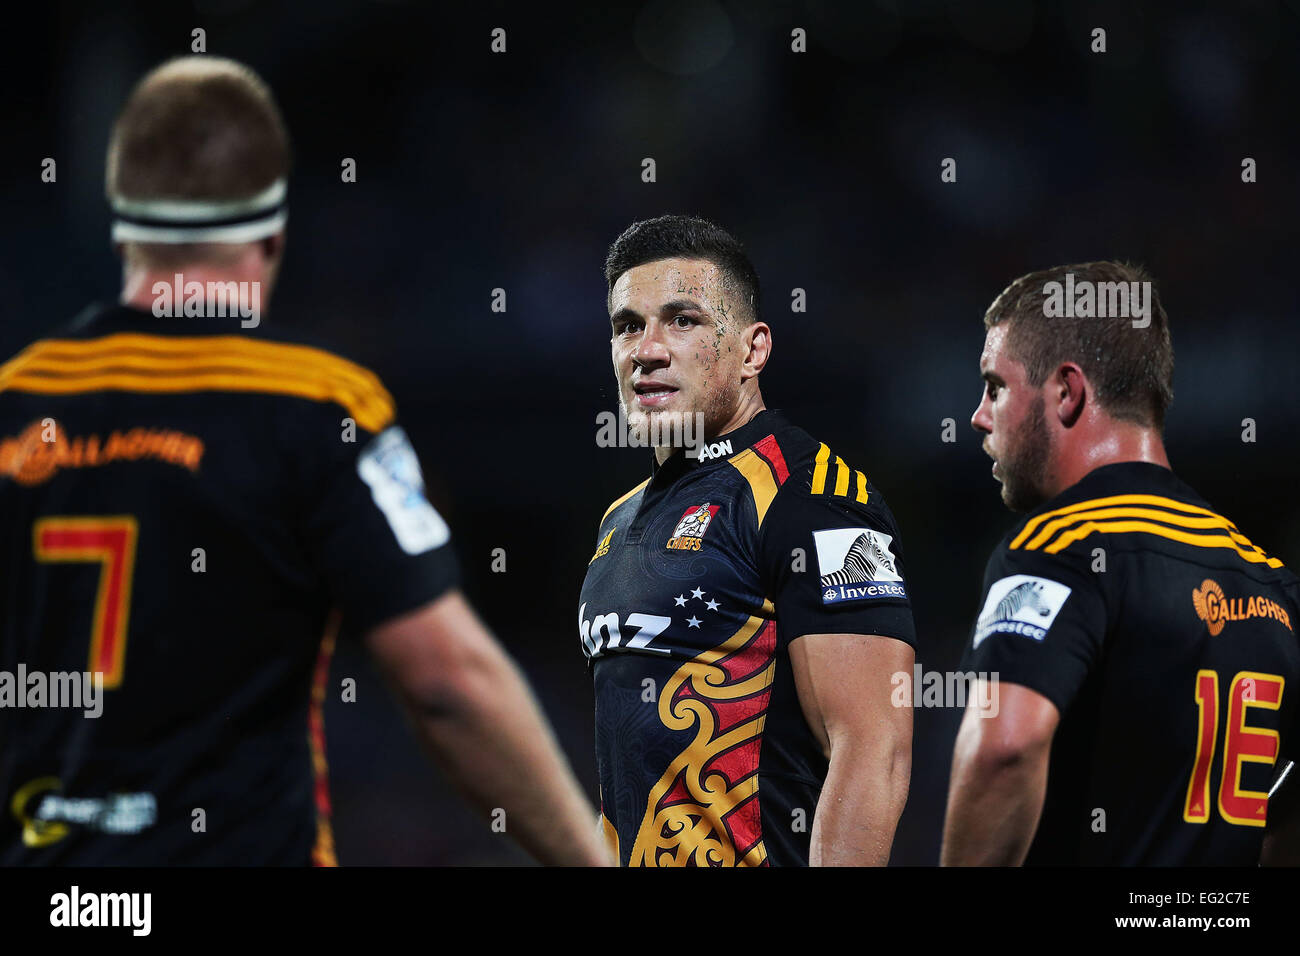 Auckland, New Zealand. 14th Feb, 2015. Sonny Bill Williams of the Chiefs looks on. Super Rugby match, Blues (Auckland) versus Chiefs (Hamilton) at QBE Stadium, Auckland, New Zealand. Saturday 14 February 2015. The Chiefs ran out winners by 18-23 in a close derby. © Action Plus Sports/Alamy Live News Stock Photo